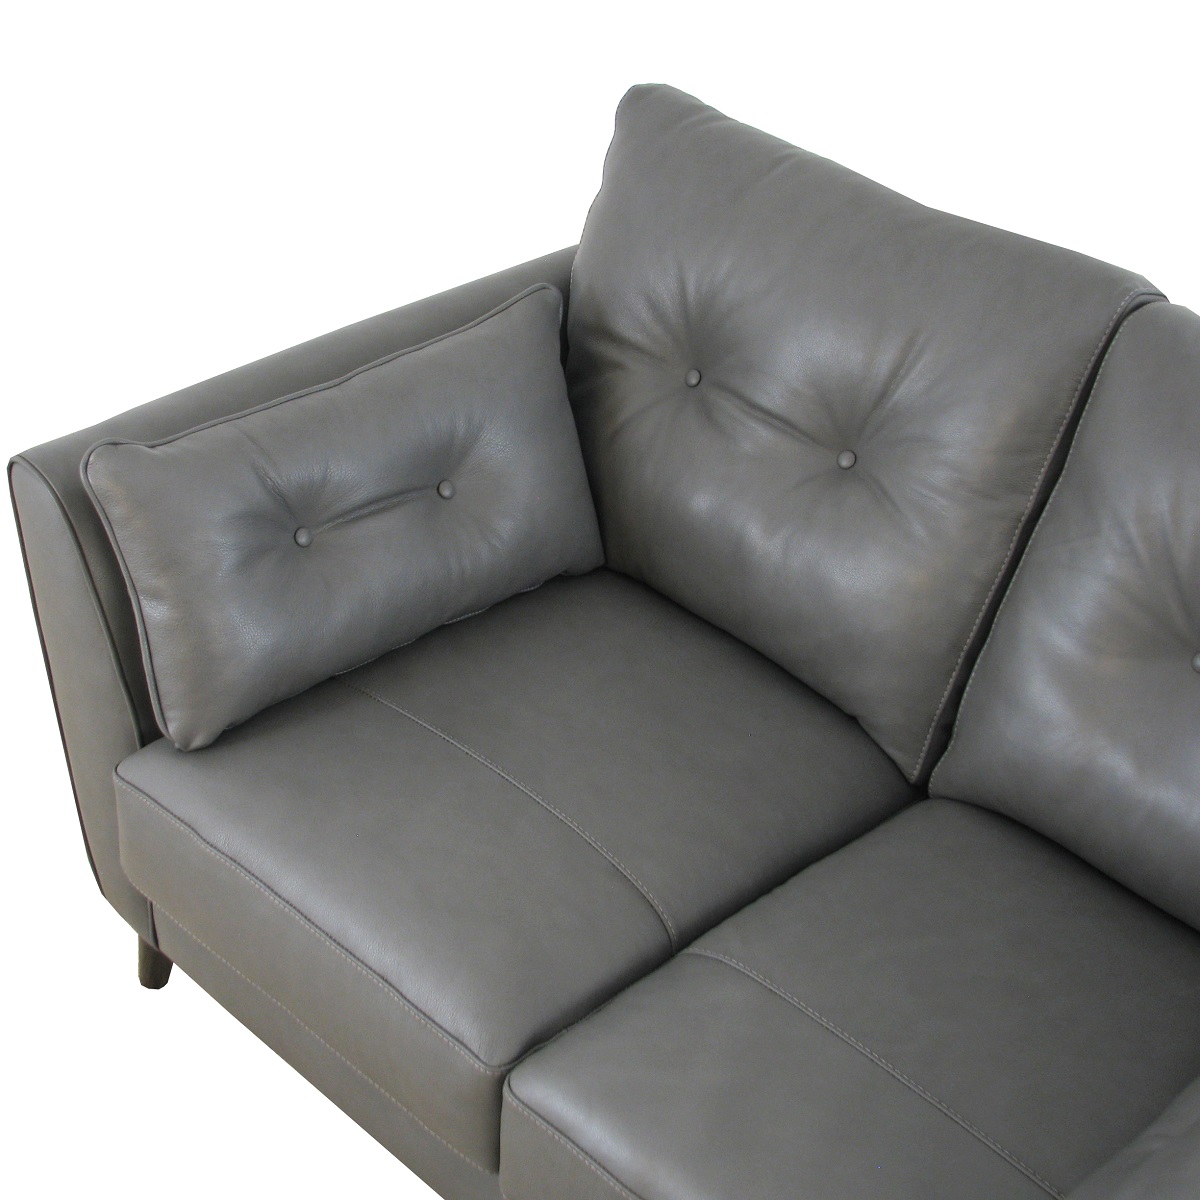 Bellagio Loveseat - OUTLET